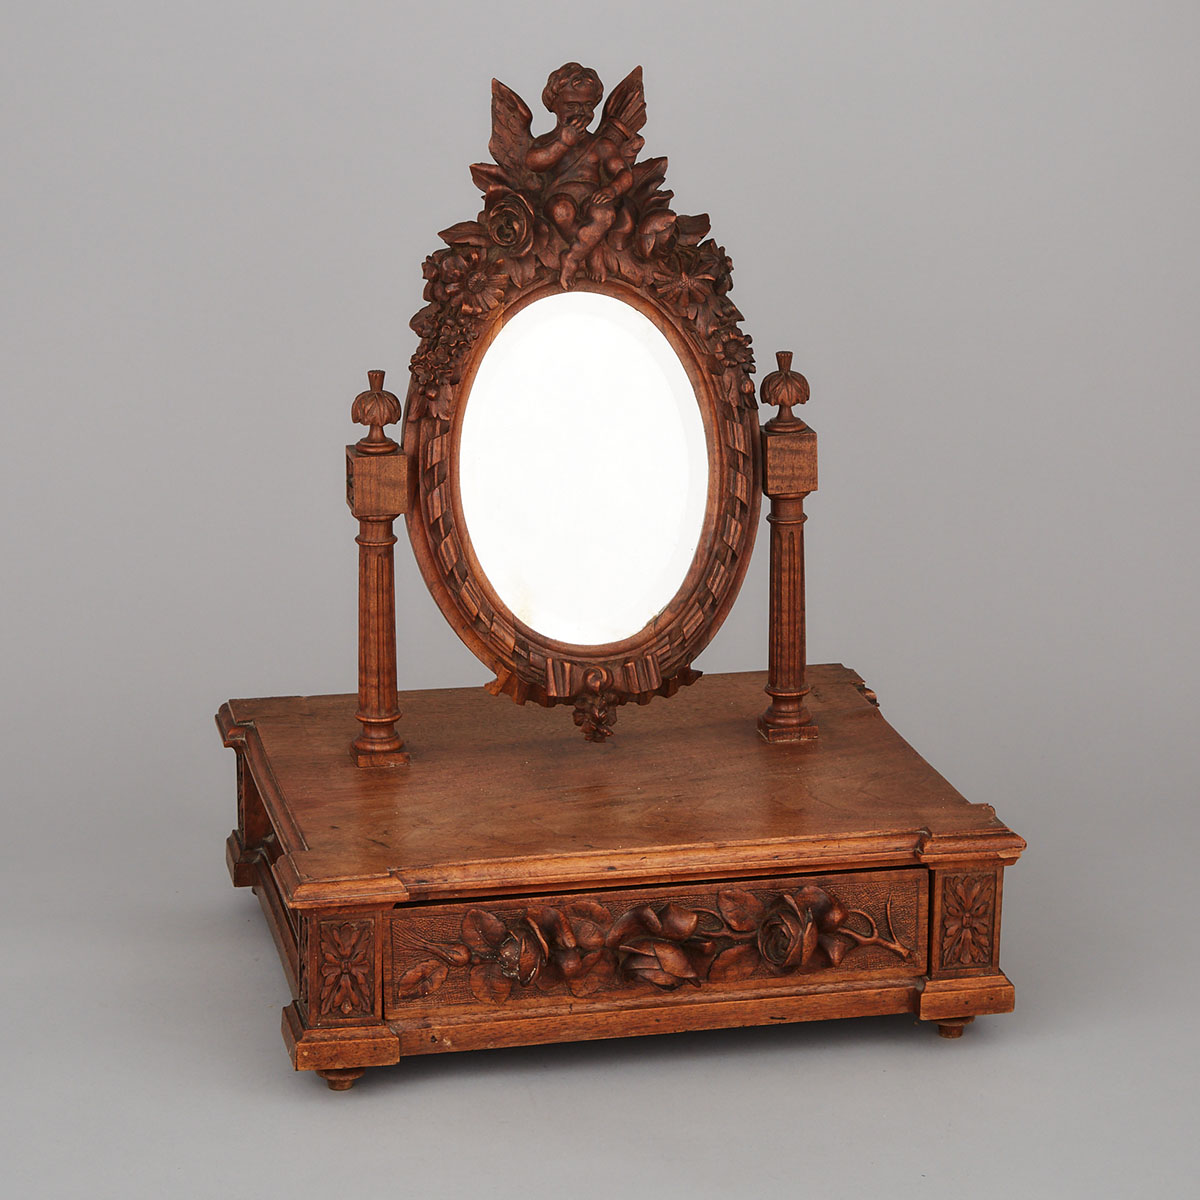 French Carved Walnut Dressing Table Mirror, 19th century